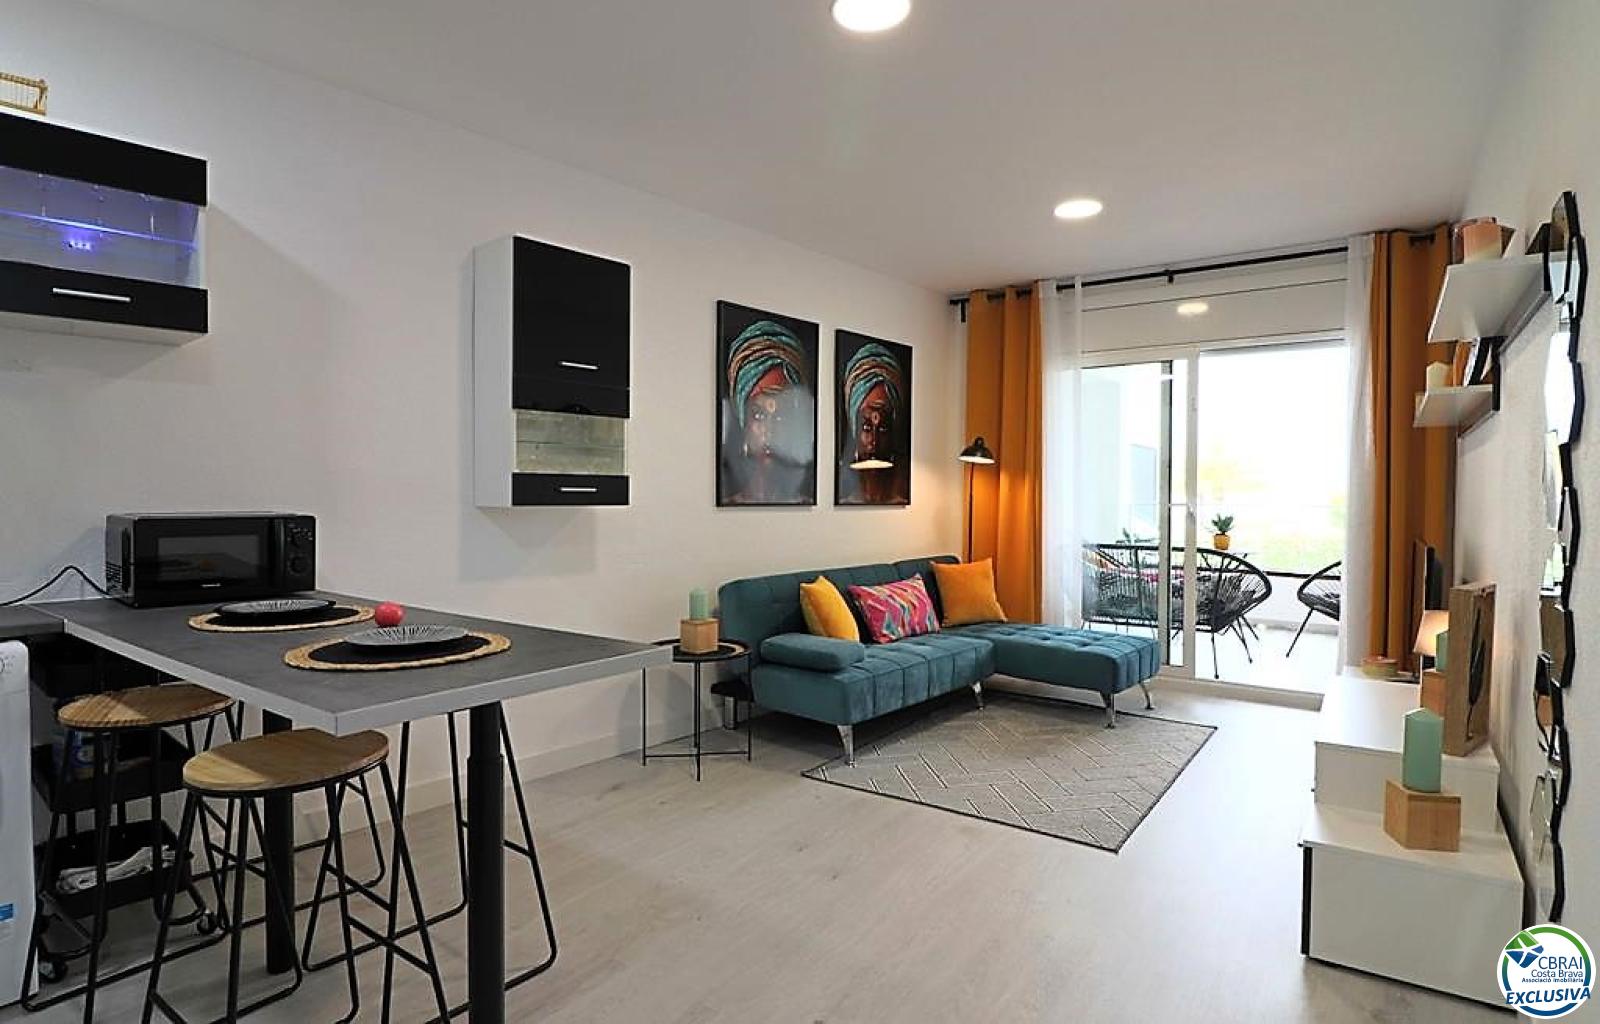 Completely renovated modern flat with canal view